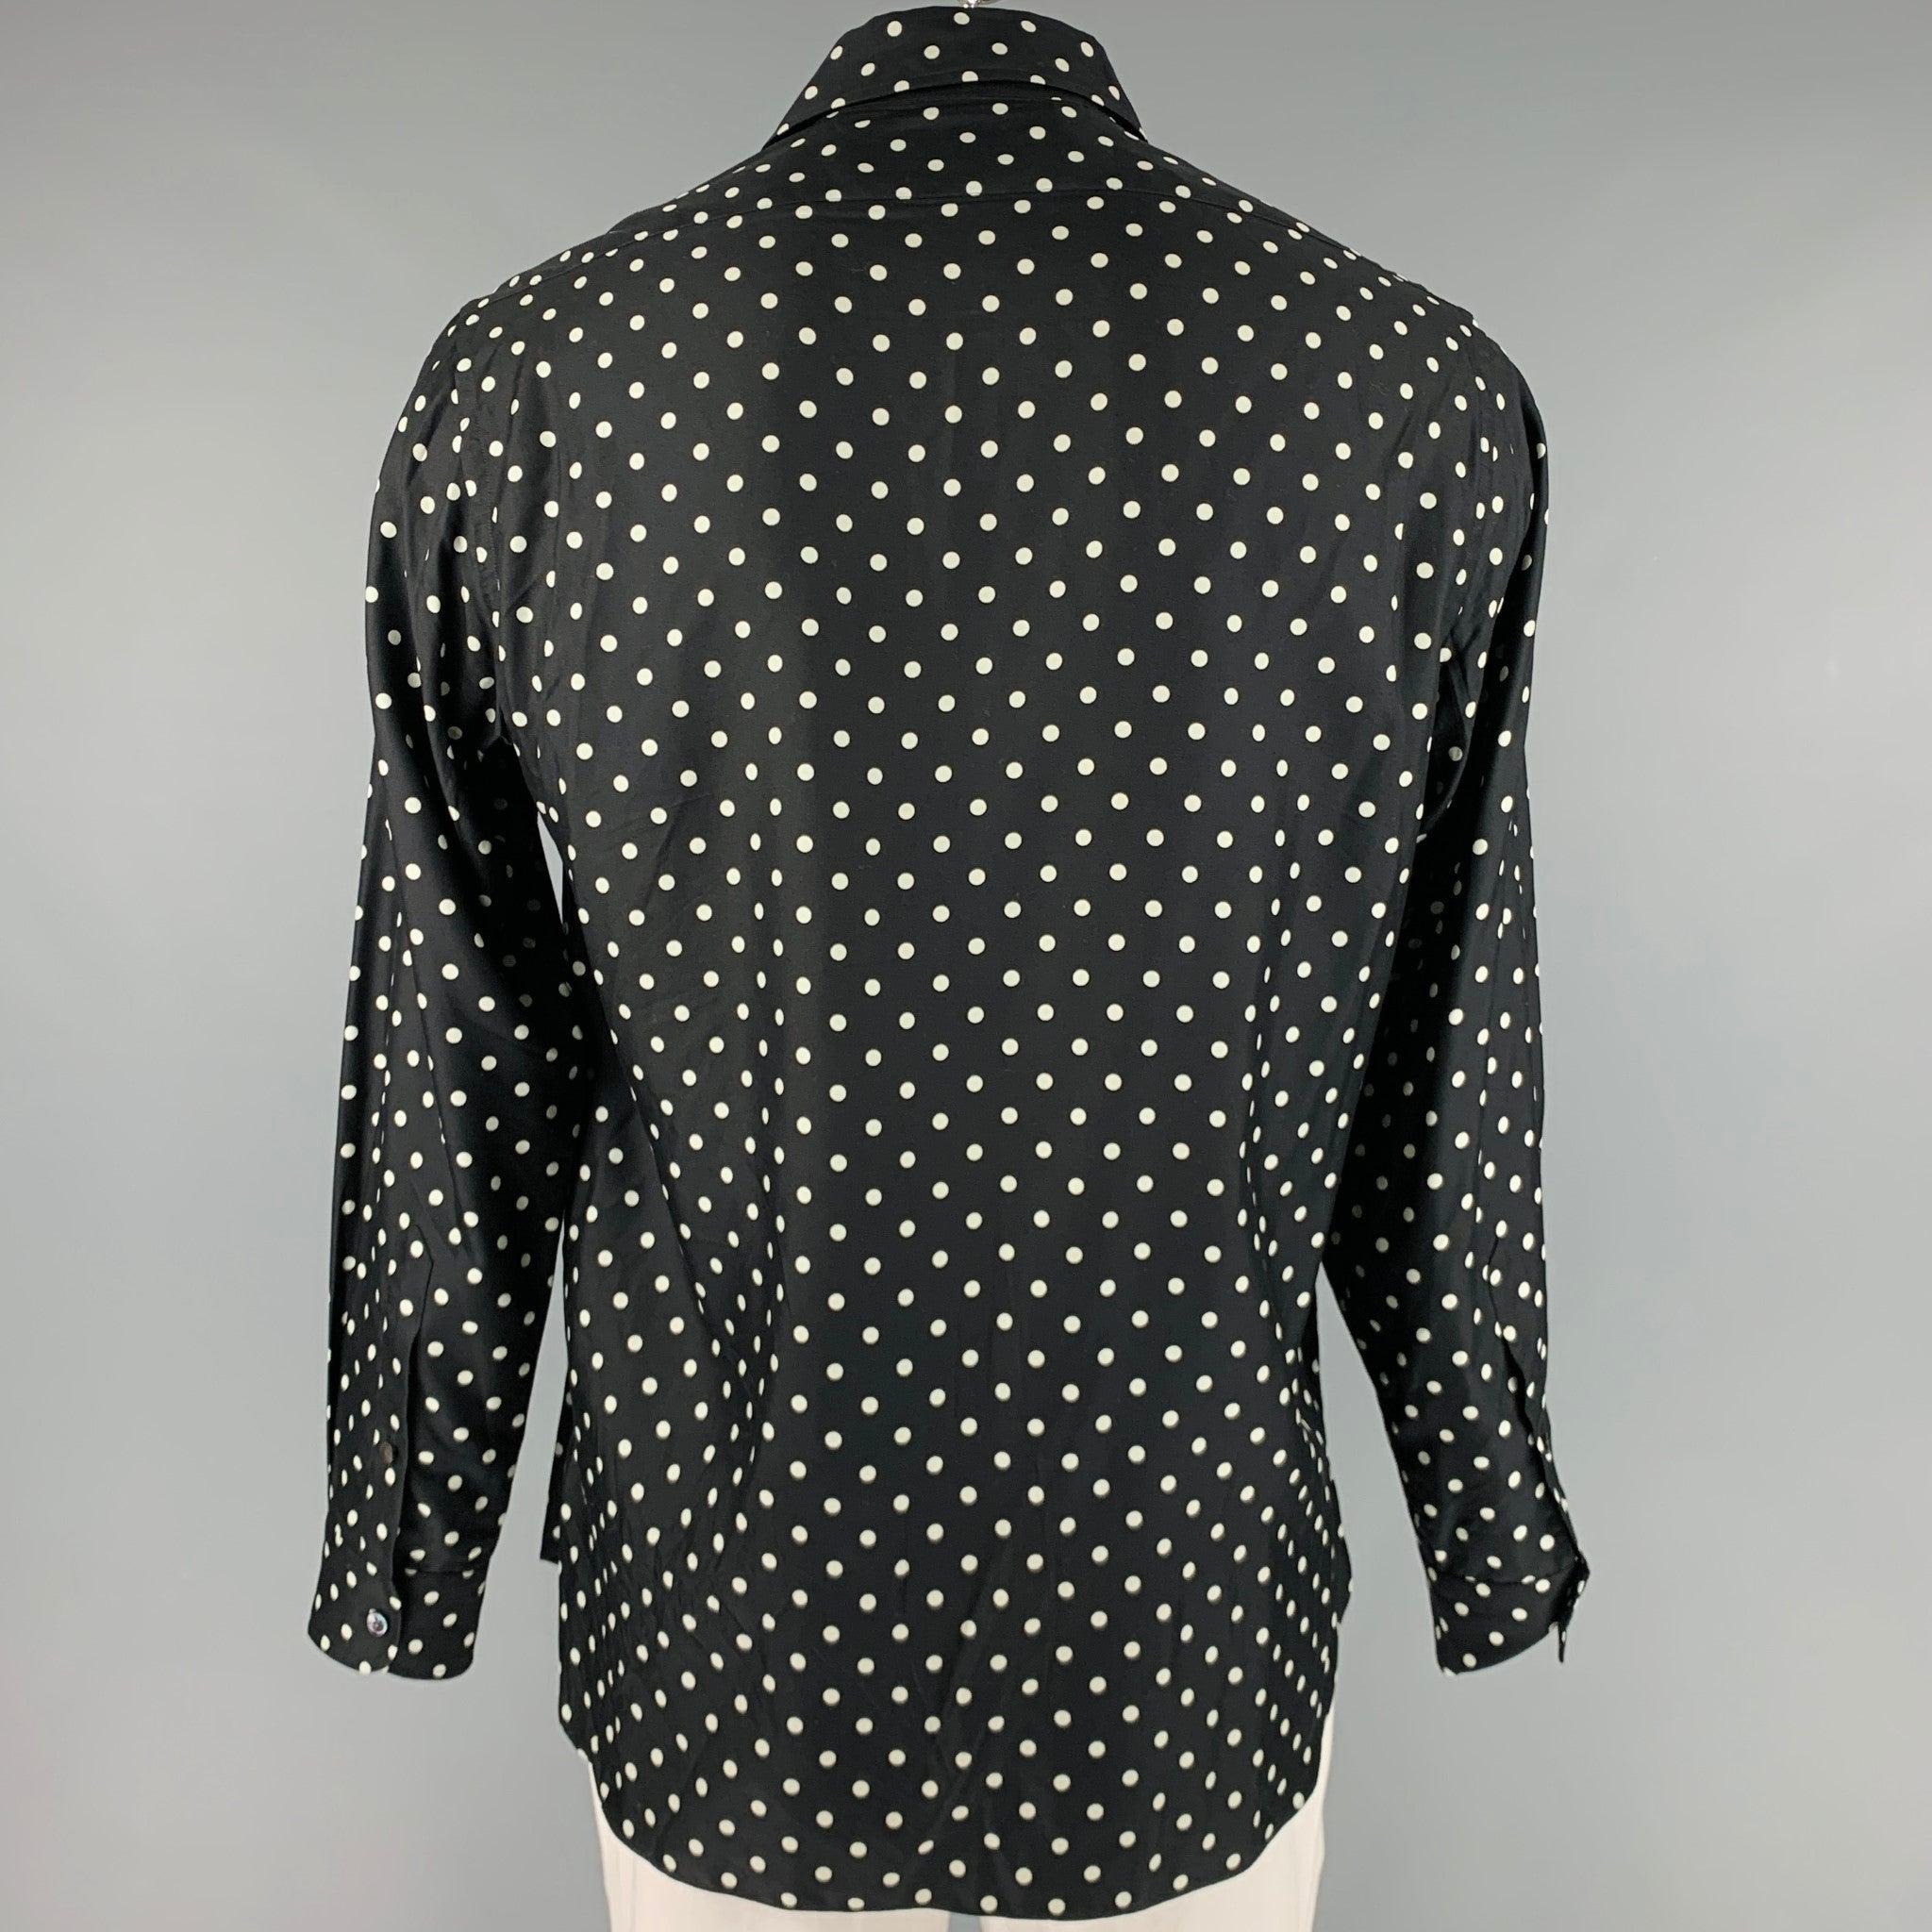 RALPH LAUREN Size L Black White Polka Dot Silk Button Up Long Sleeve Shirt In Good Condition For Sale In San Francisco, CA